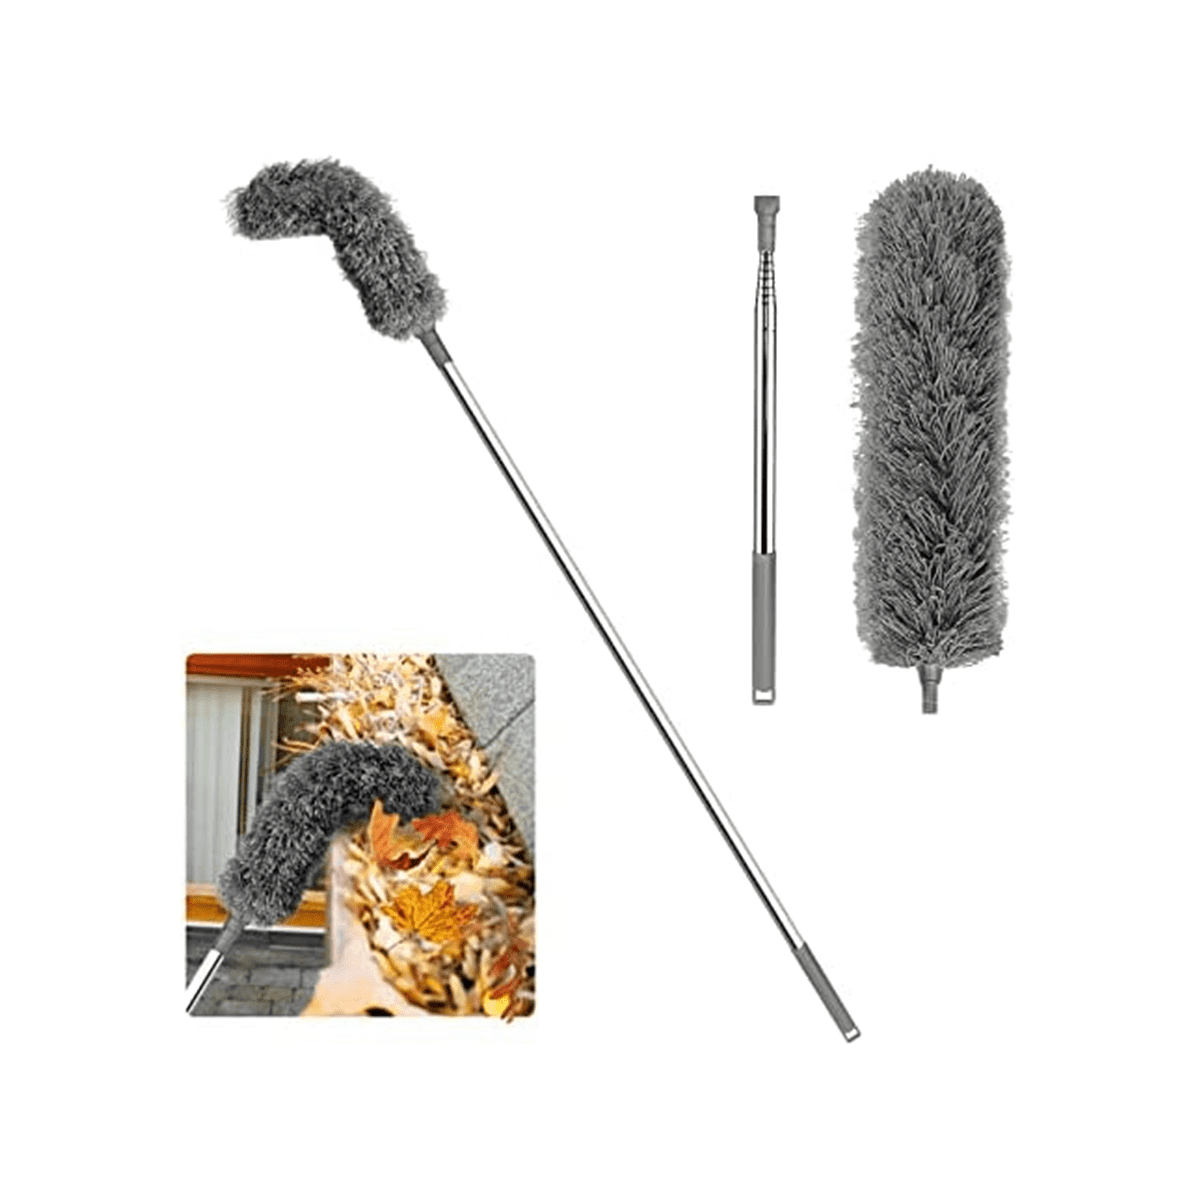 Pearwow Gutter Cleaning Brush,Extendable Guard Cleaner Tool with Telescopic  Pole Stiff Brush for Removing Leaves and Debris from The Ground